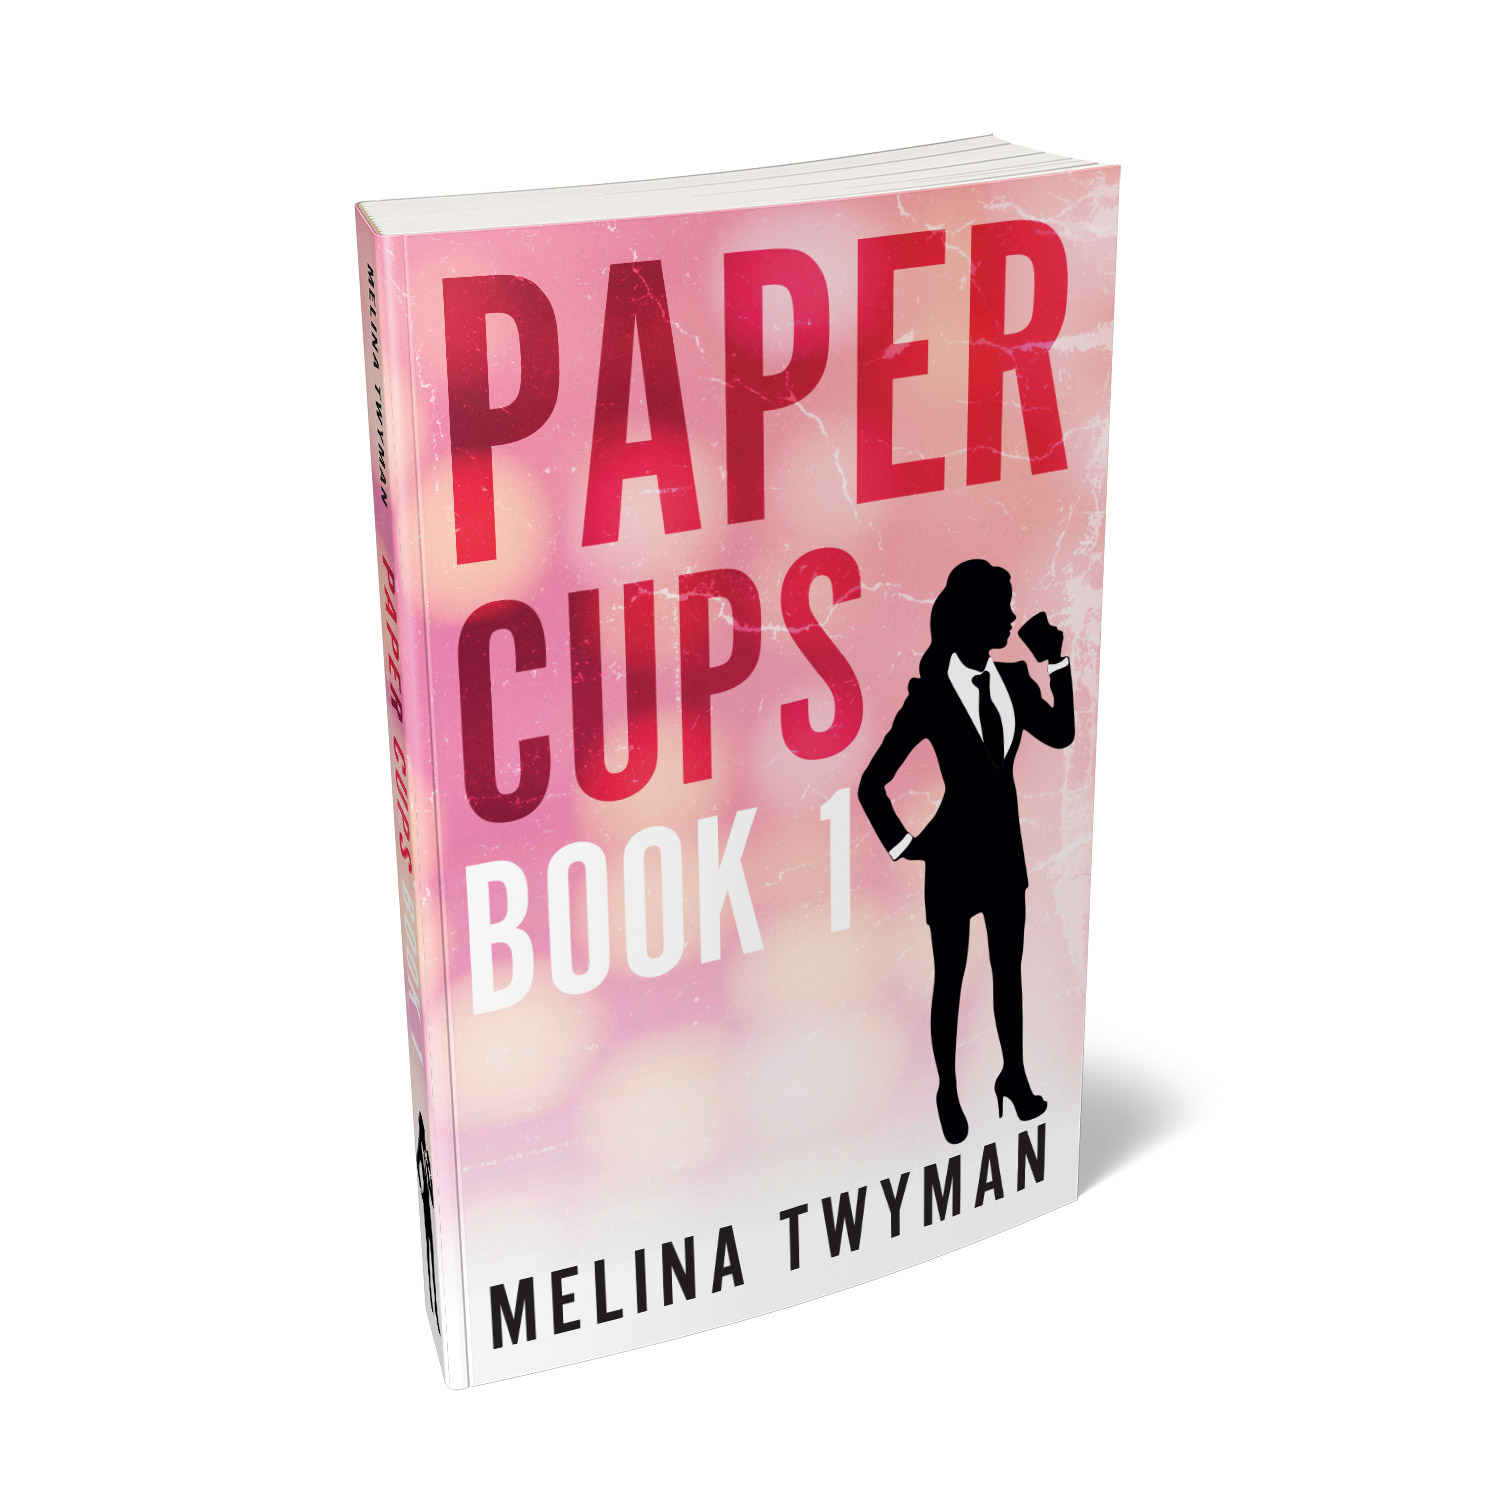 'Paper Cups' is an excellent study of a young woman's struggles with social alcoholism. The author is Melina Twyman. The book cover design and interior formatting are by Mark Thomas. To learn more about what Mark could do for your book, please visit coverness.com.